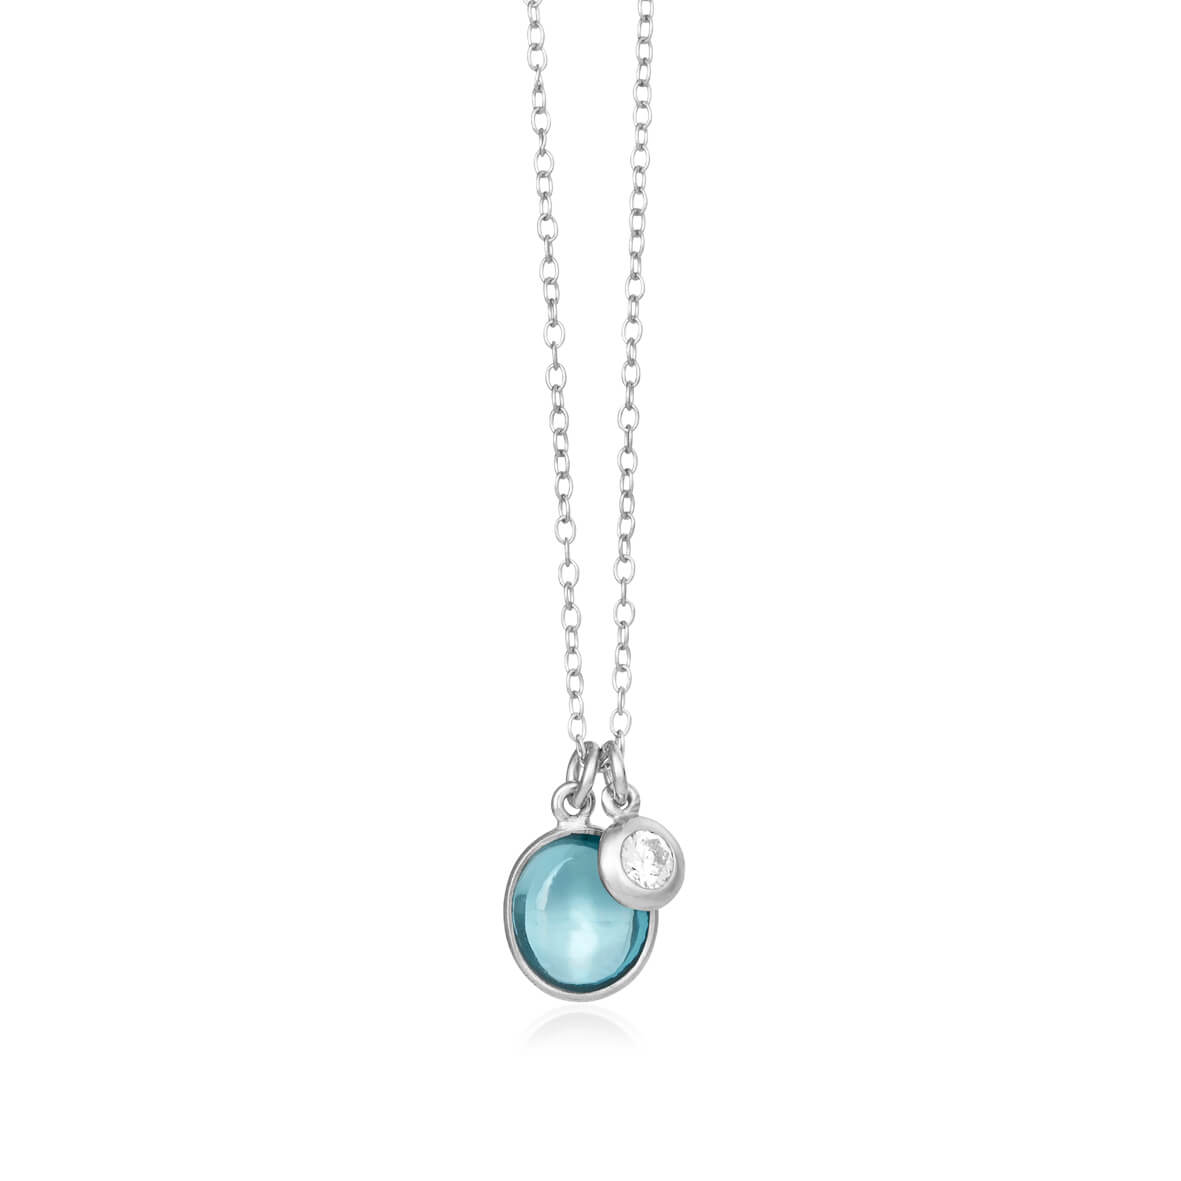 Necklace in silver with london blue crystal / 981-1-174 - Susanne Friis ...